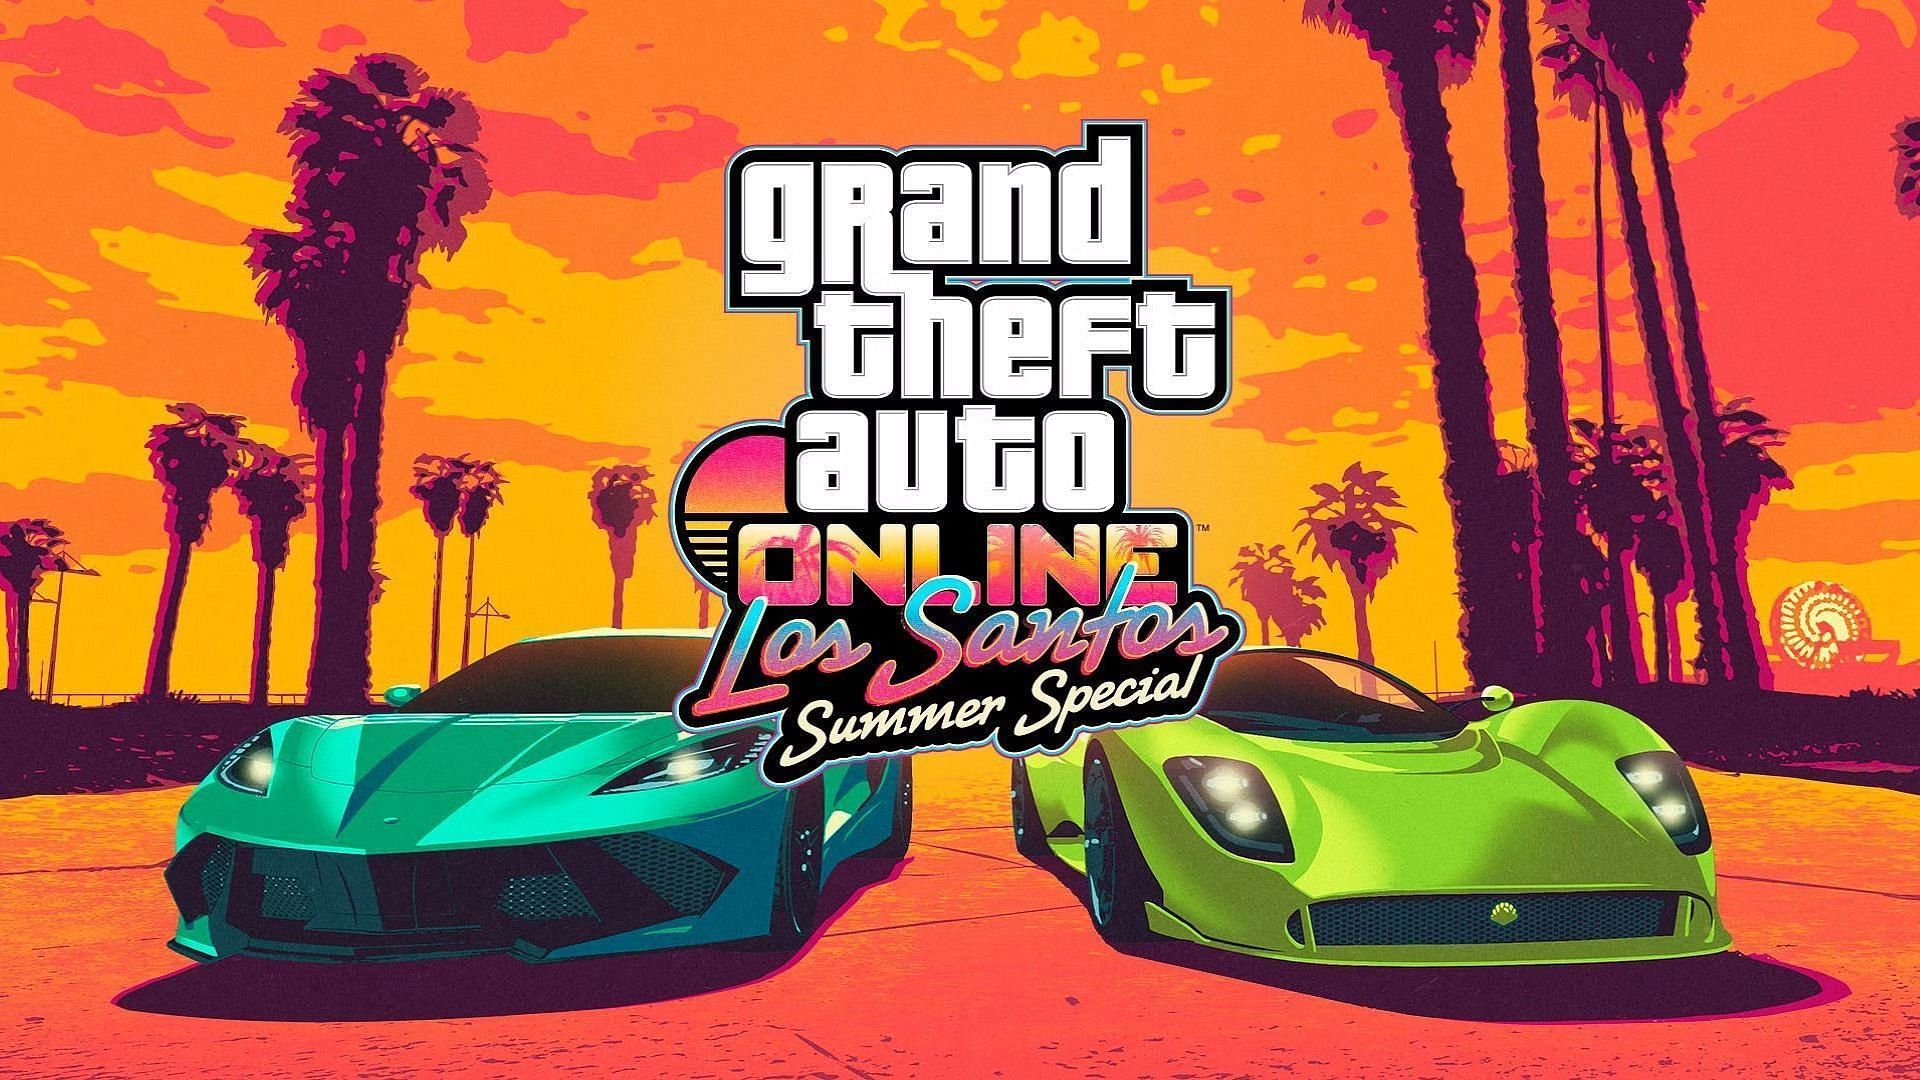 The Los Santos Summer Special update also introduced some new vehicles (Image via Rockstar Games)